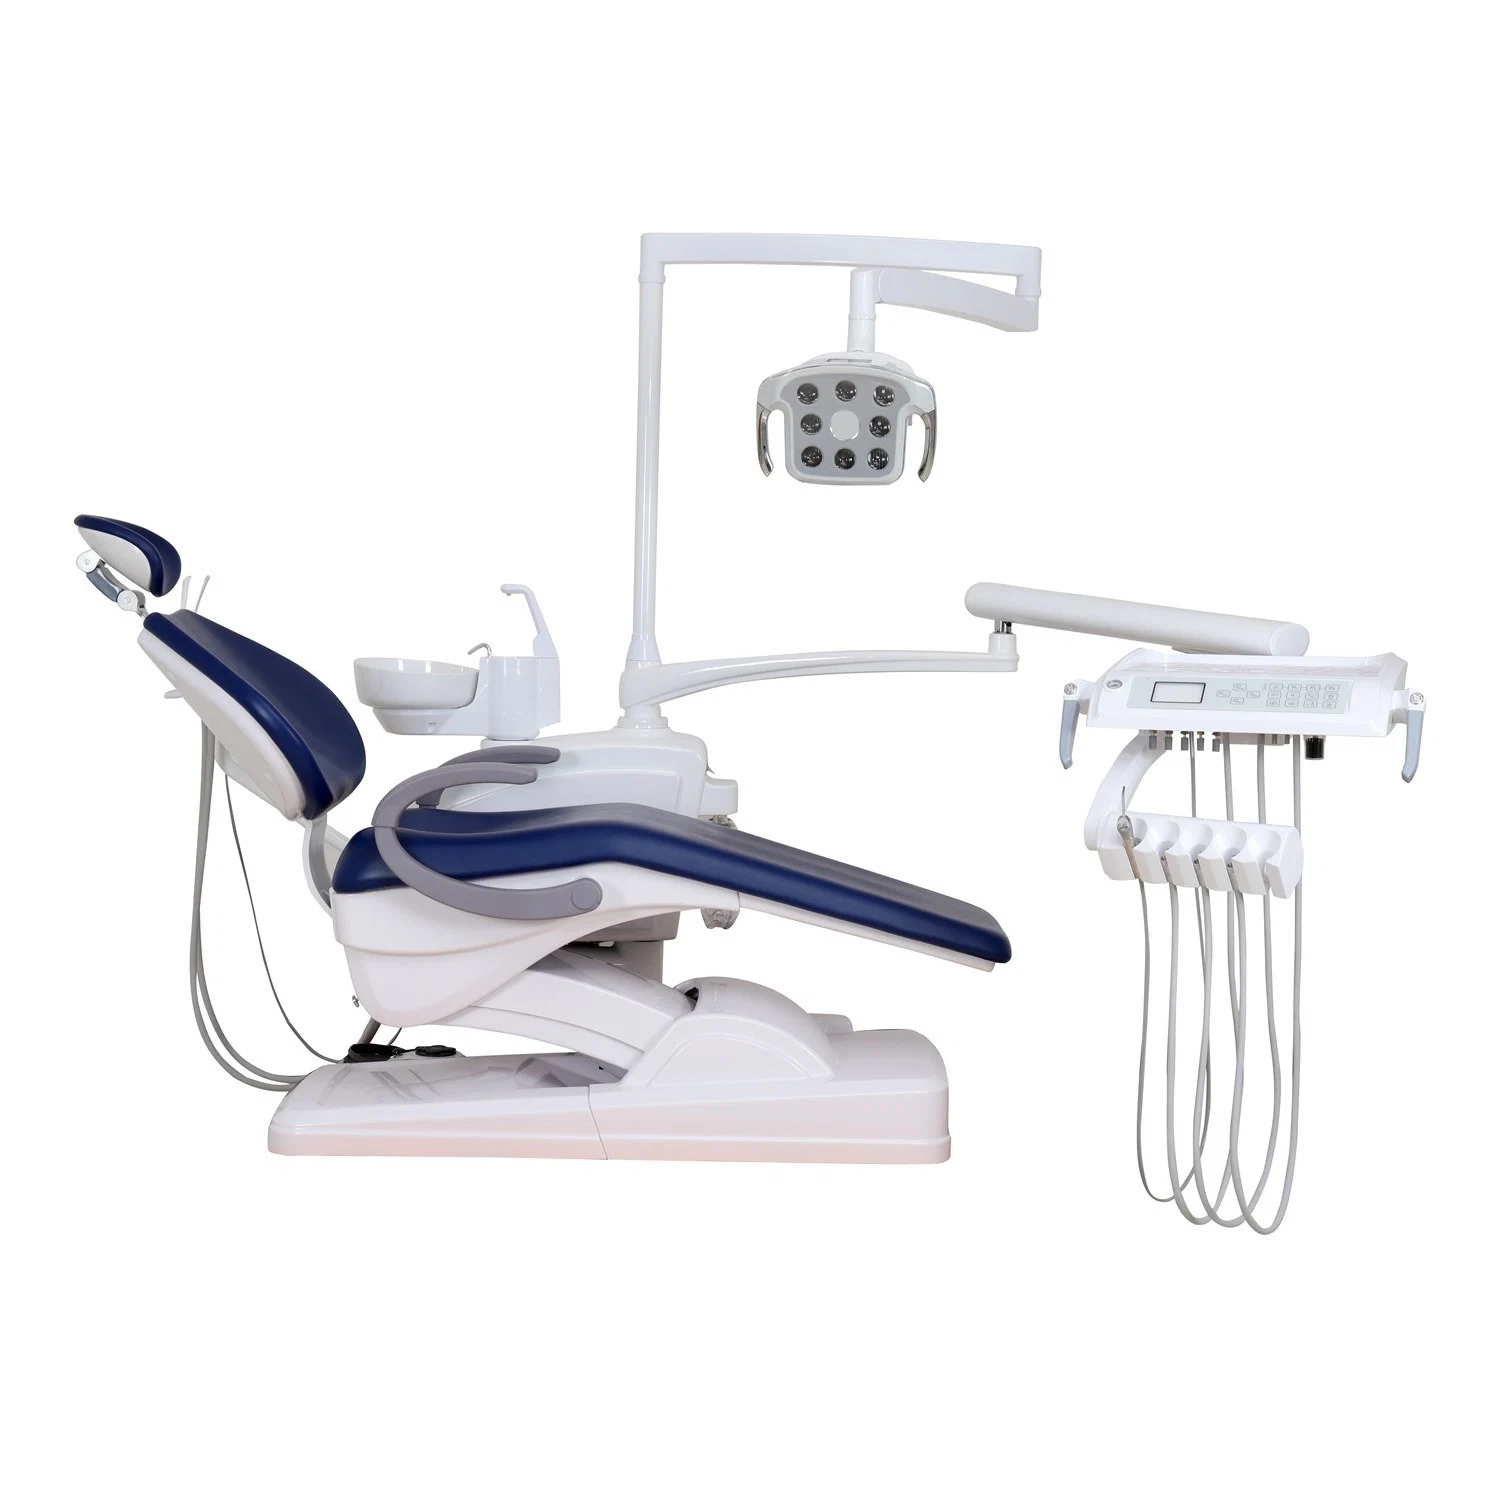 China Supply Best Wholesale/Supplier Price Economic Basic Dental Product Unit Equipment Chair Dental Instrument